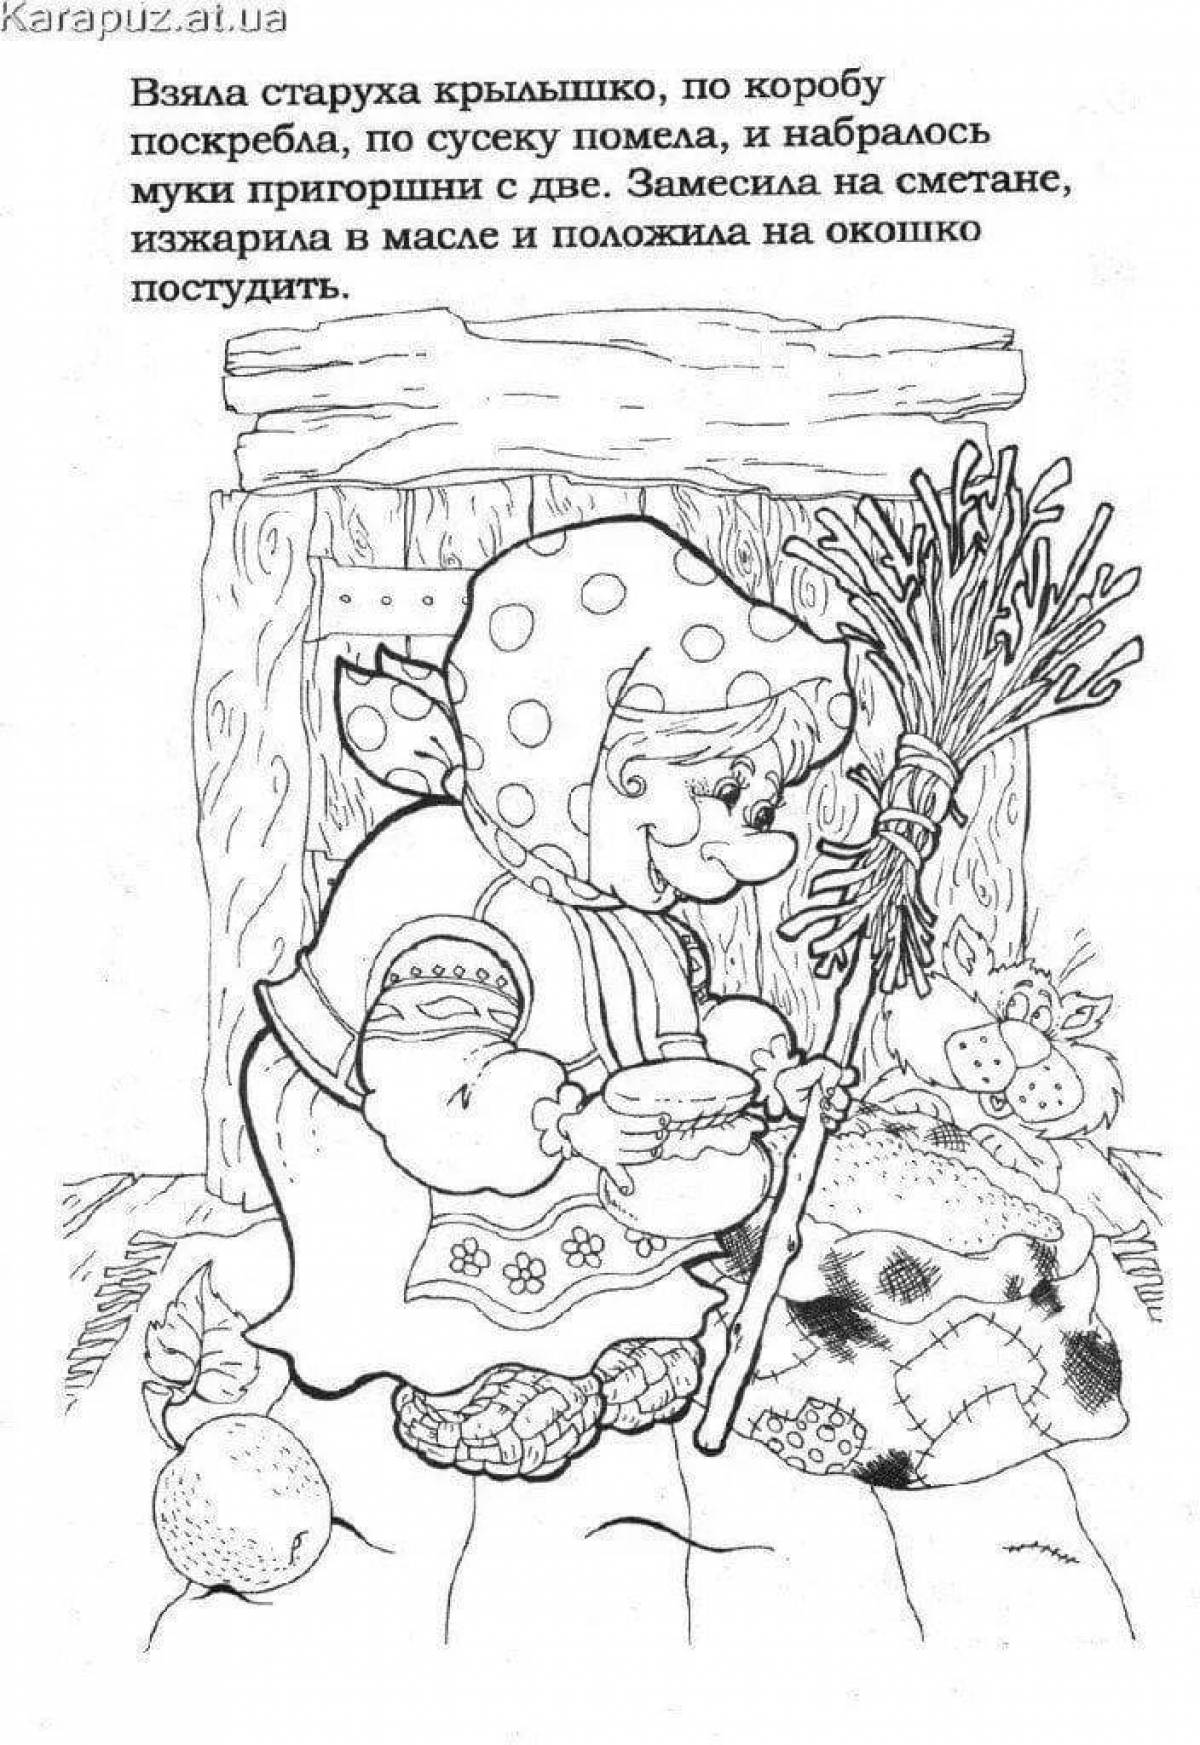 Fascinating fairy tale coloring book